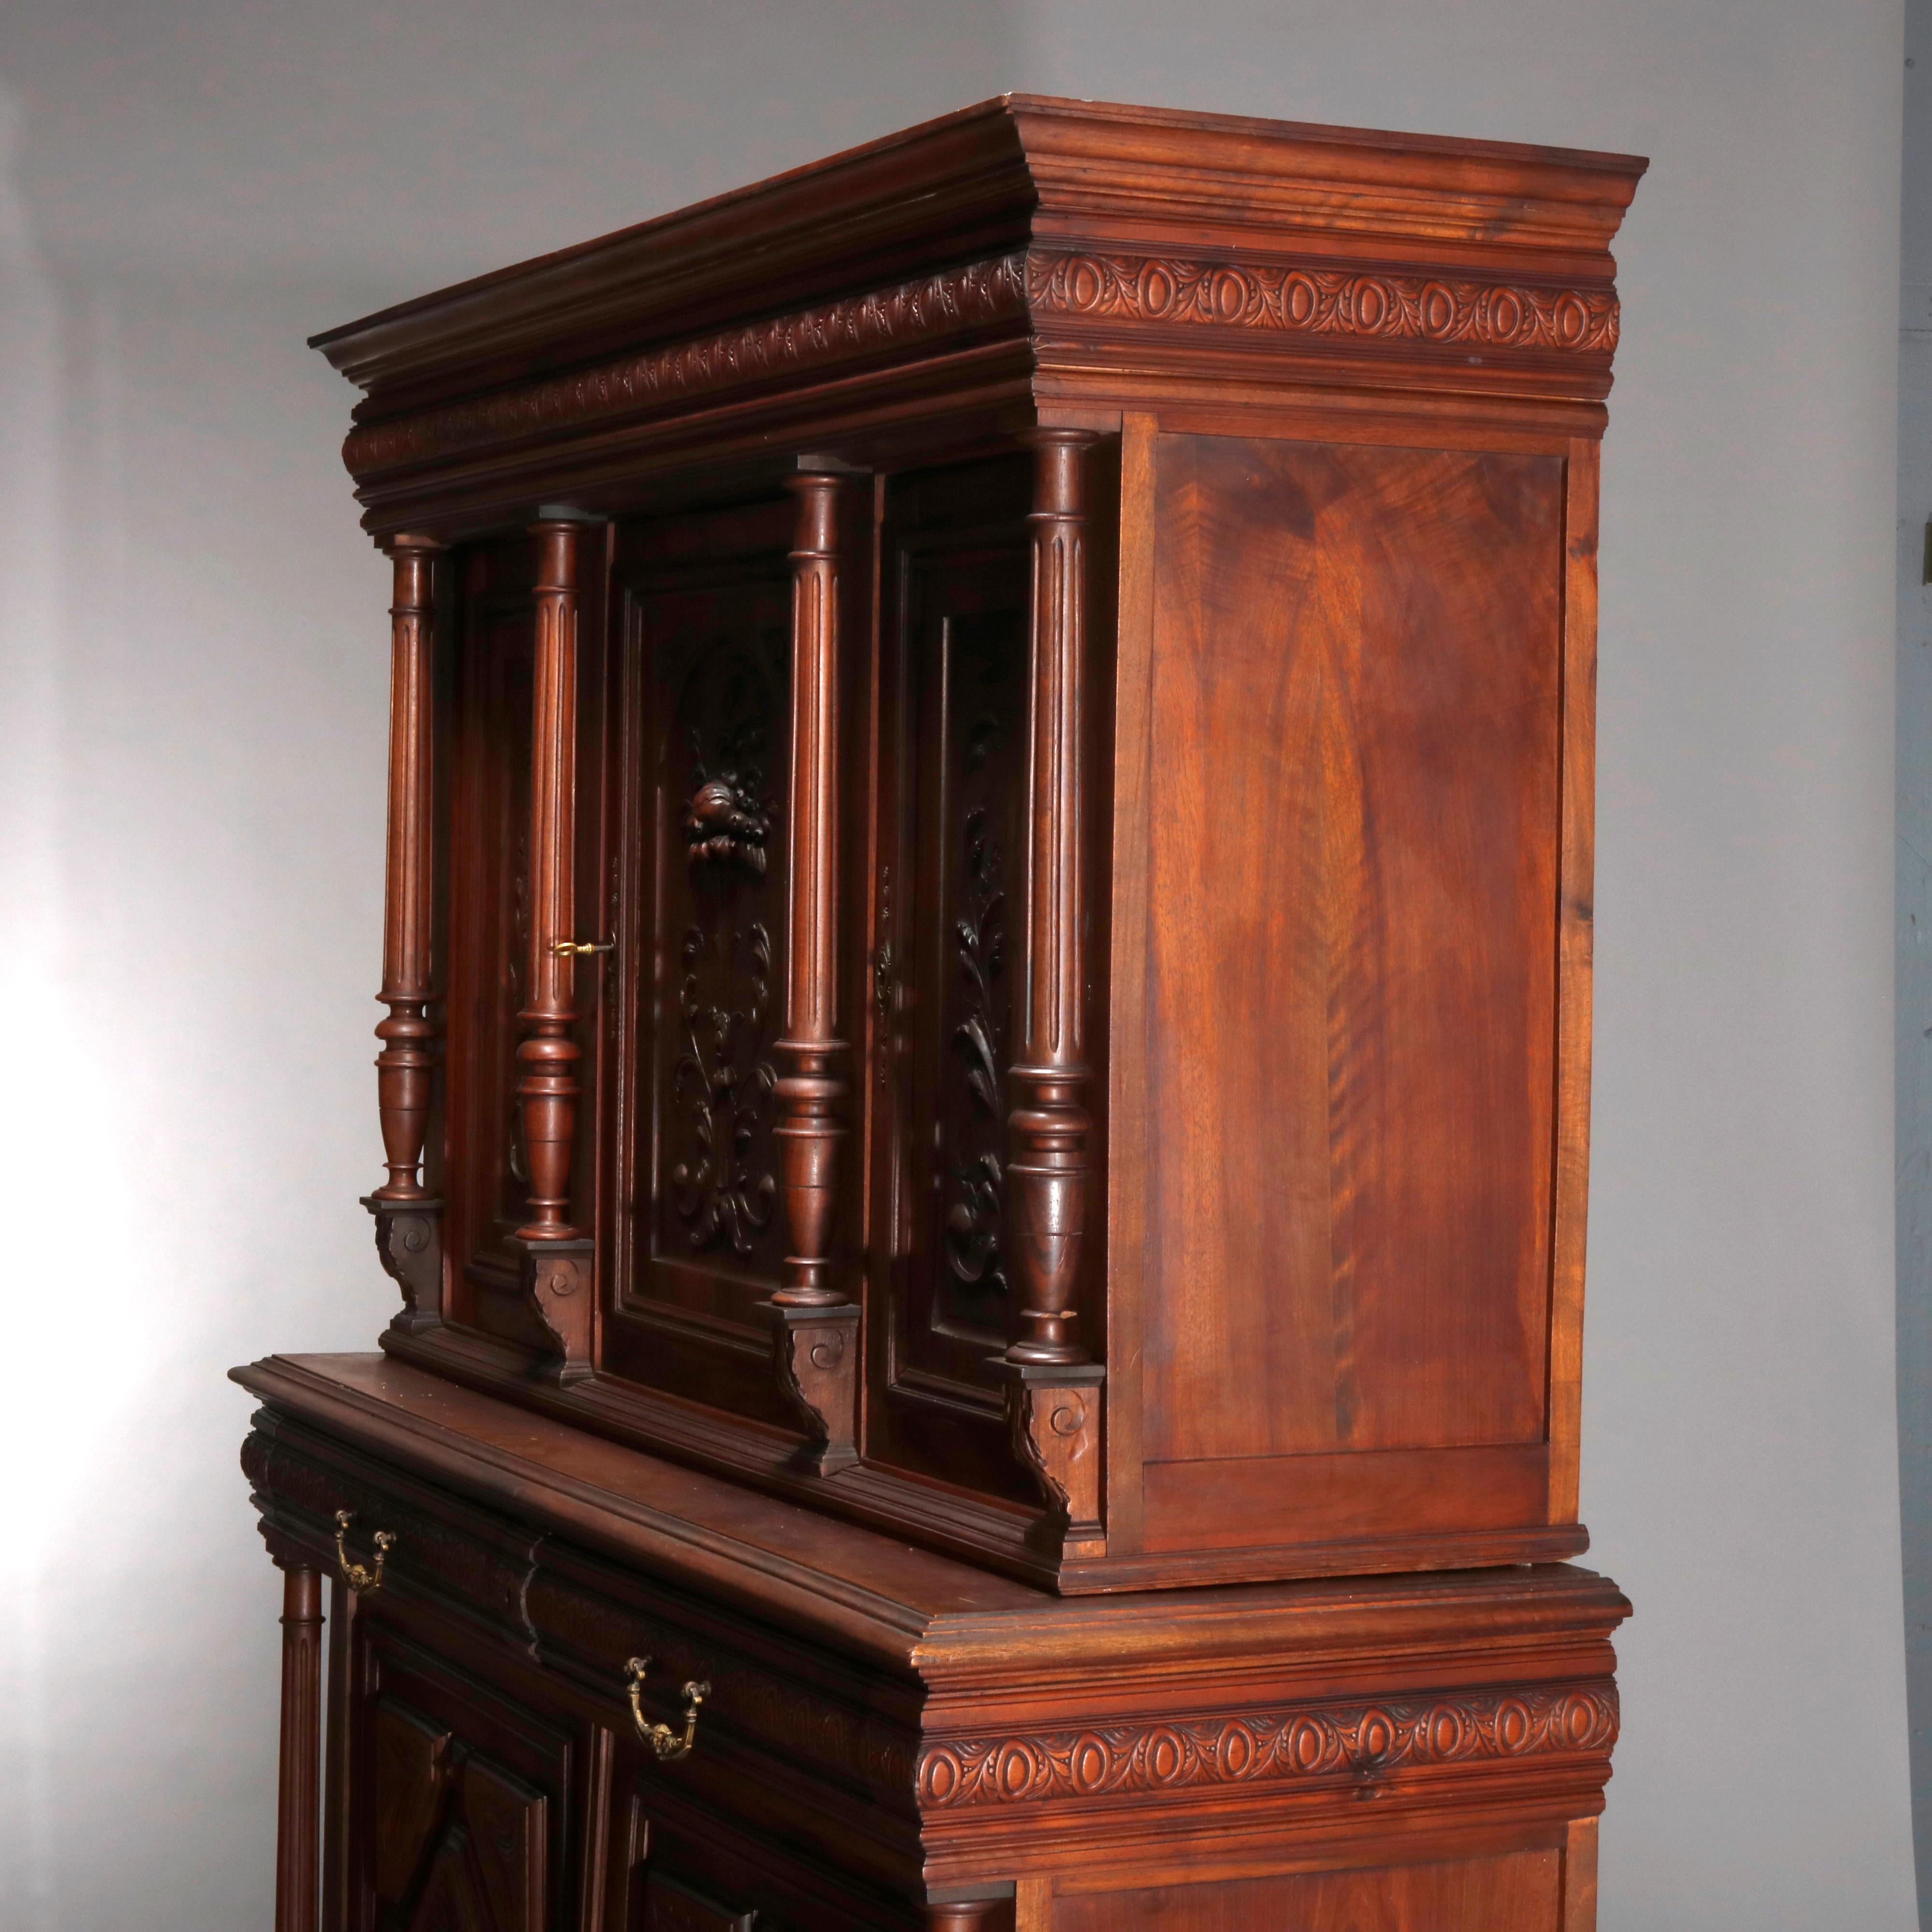 Antique French Renaissance deeply carved walnut cupboard with full columns, Panier de Fleurs and acanthus, raised on bun feet, 19th century

Measures: 75.25